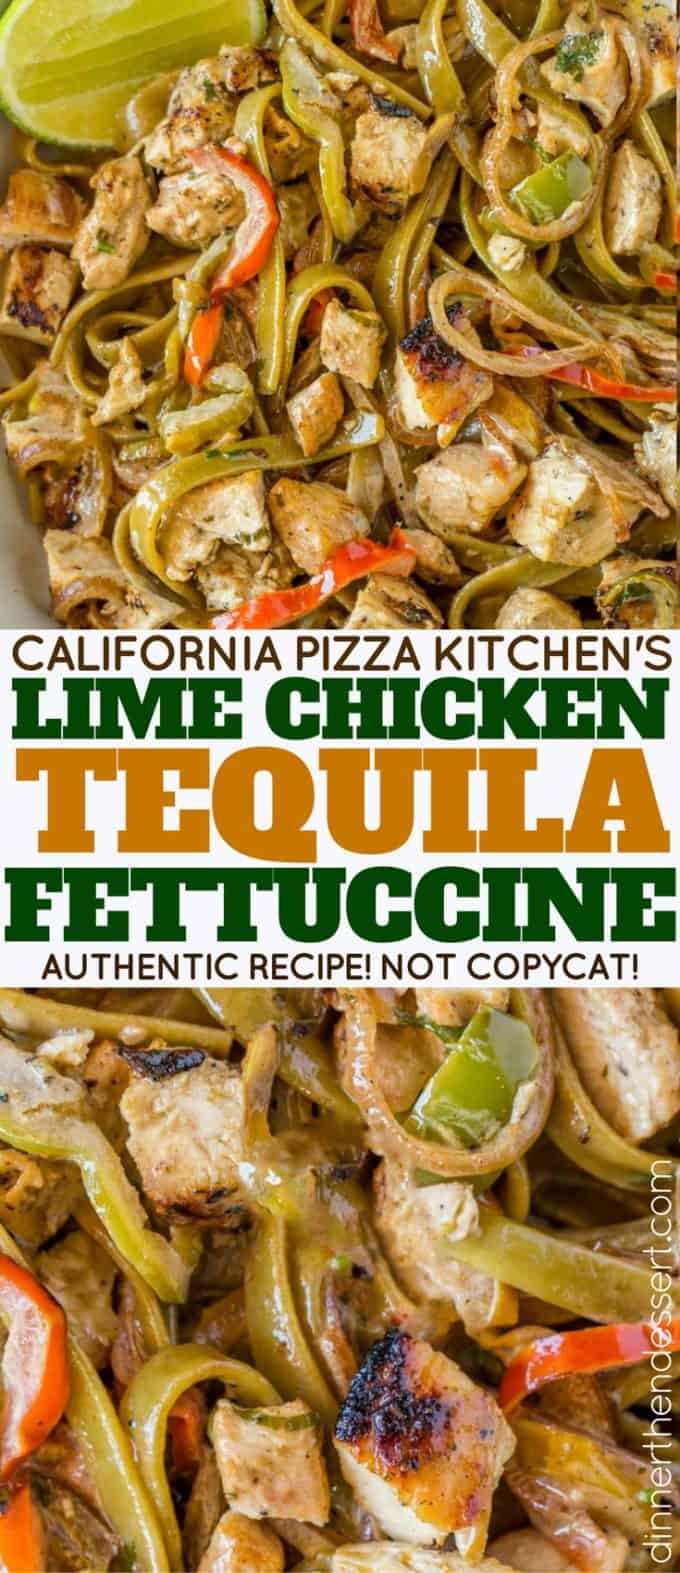 Chicken Tequila Fettucine with creamy tequila jalapeño lime sauce, pasta, bell peppers and red onions is one of the most popular entrees at California Pizza Kitchen for a reason, it's DELICIOUS!